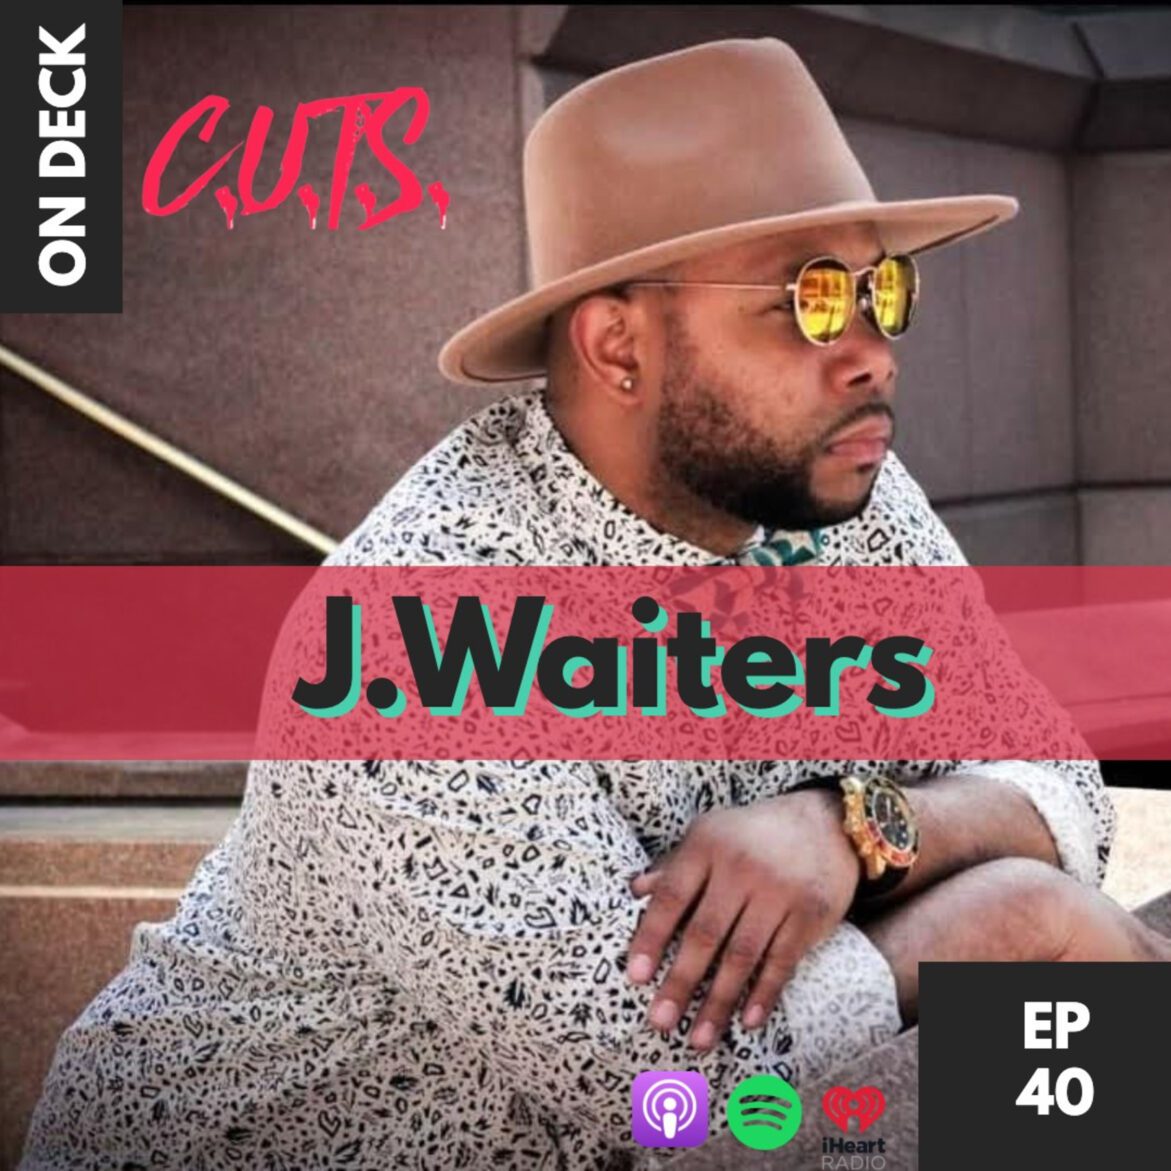 Black Podcasting - Season 2, Episode 40: Interview with Songwriter, and Singer; J.Waiters